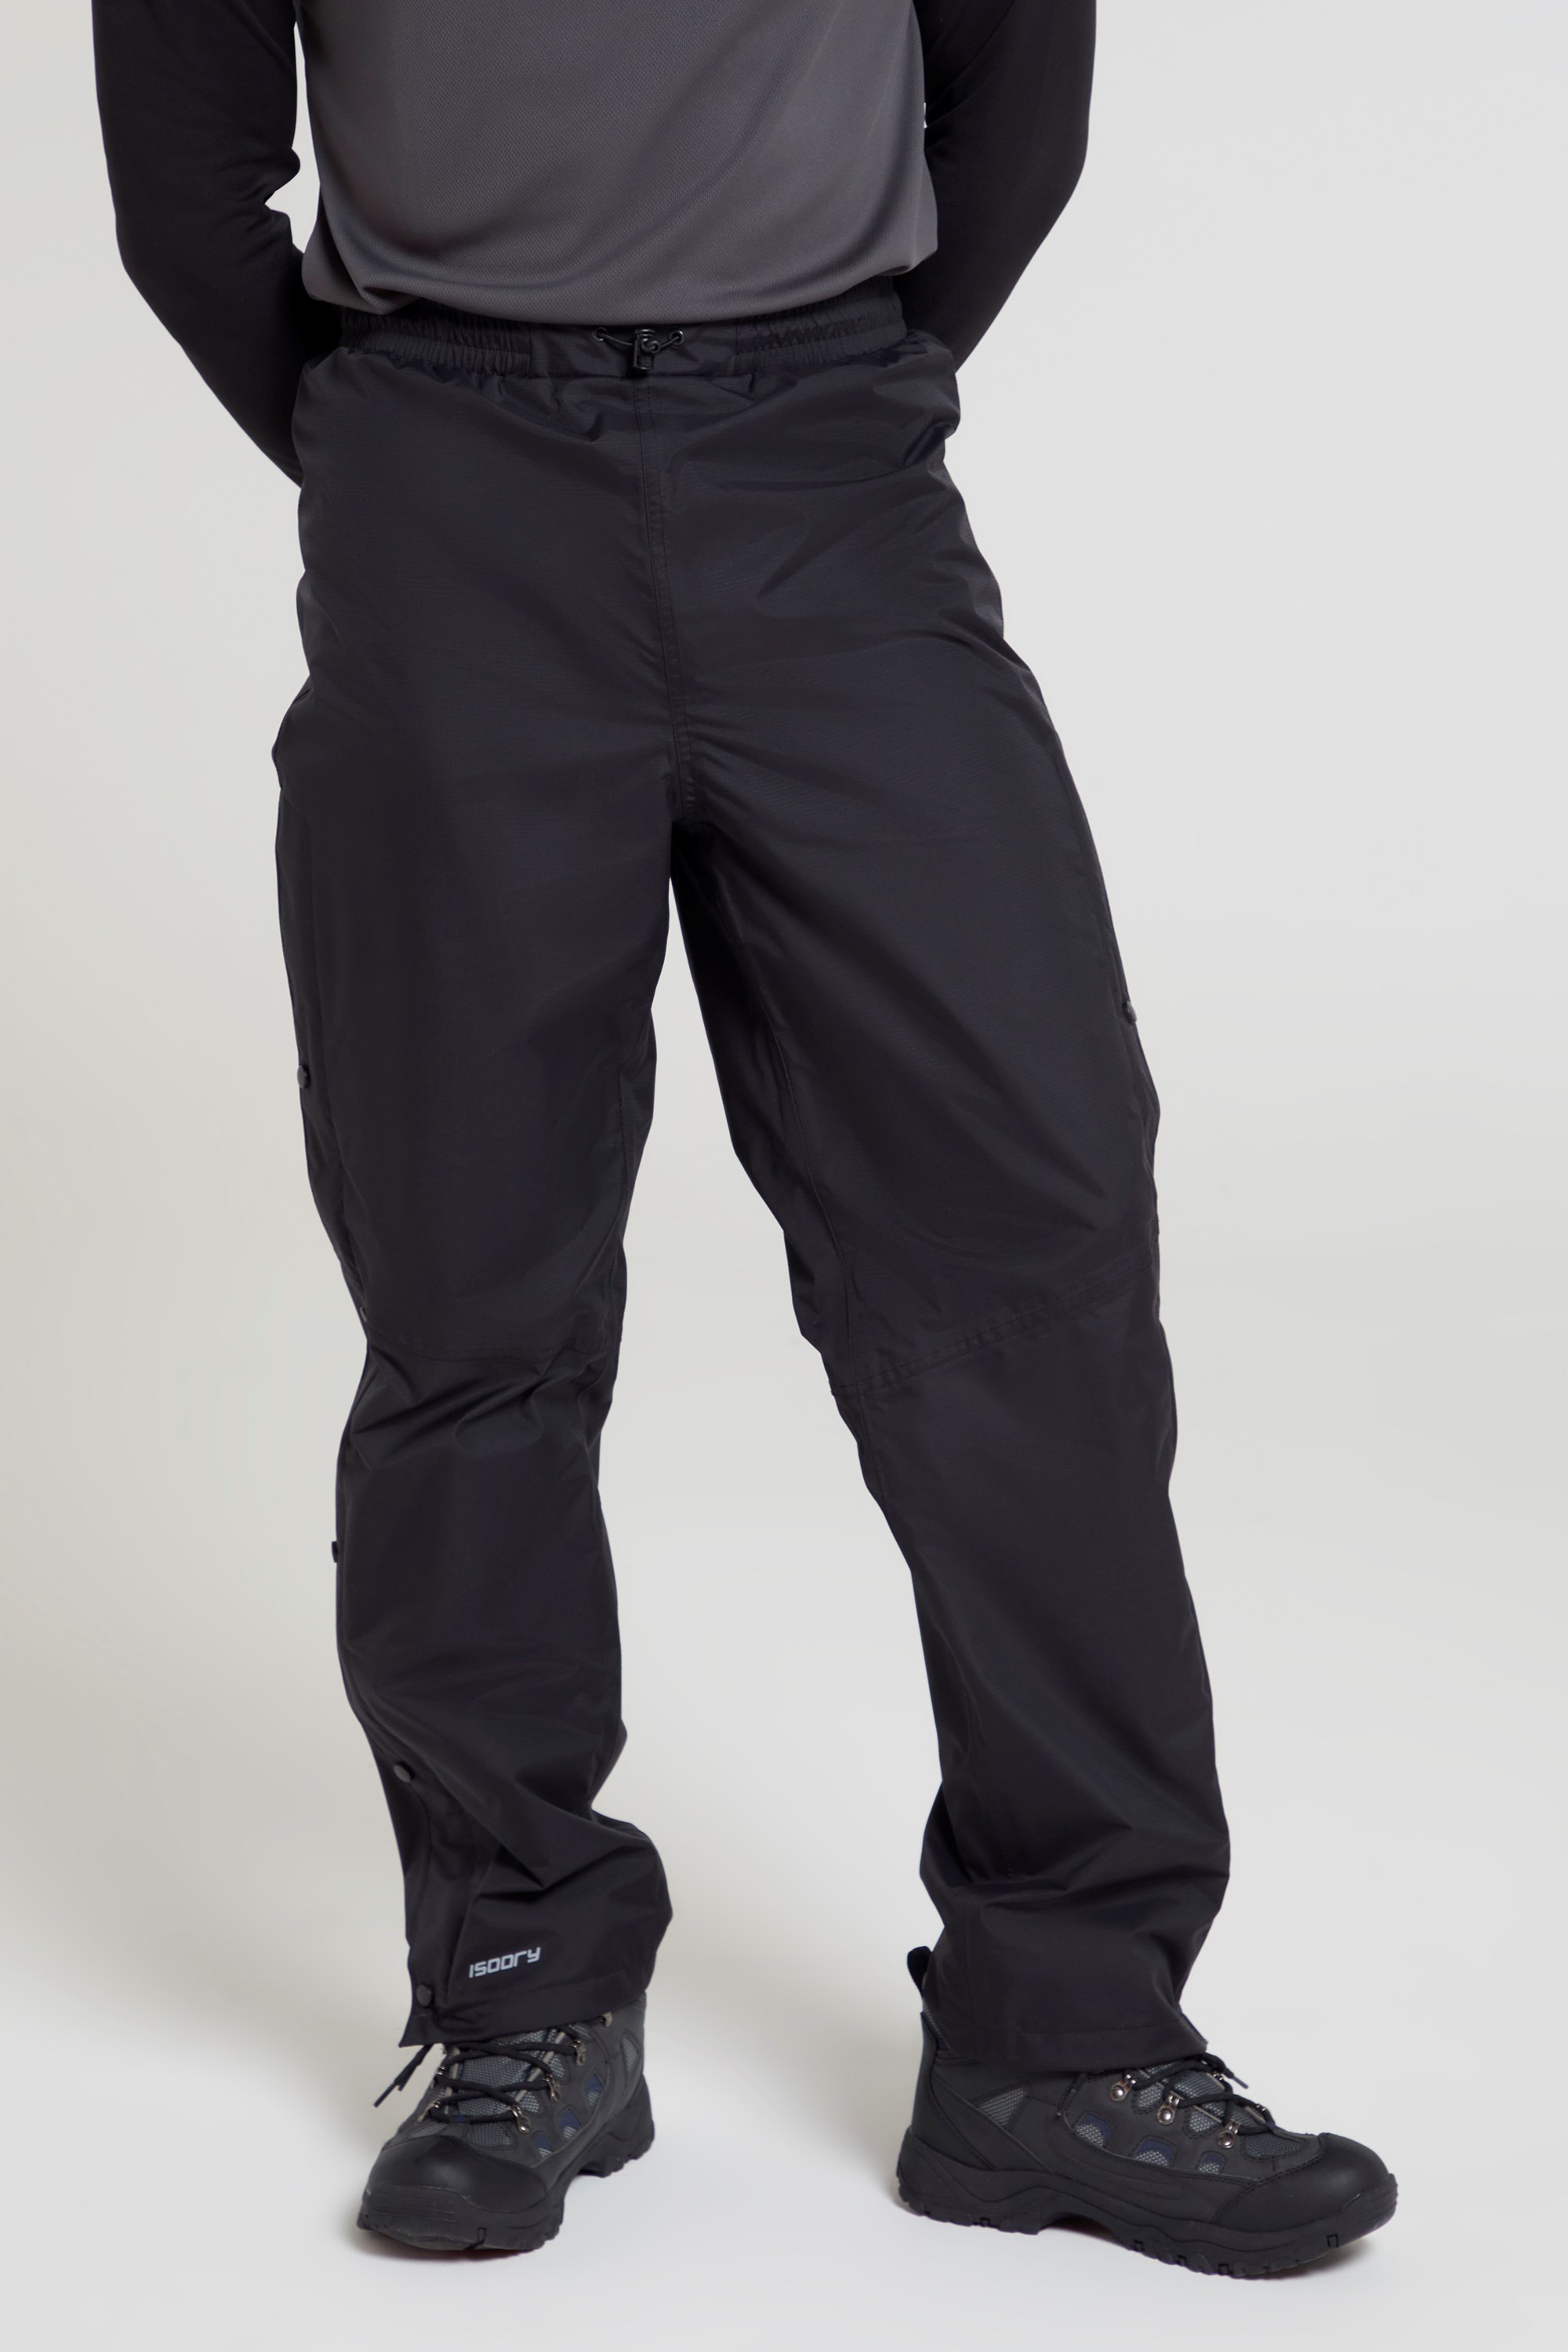 Mens Waterproof Trousers and Overtrousers